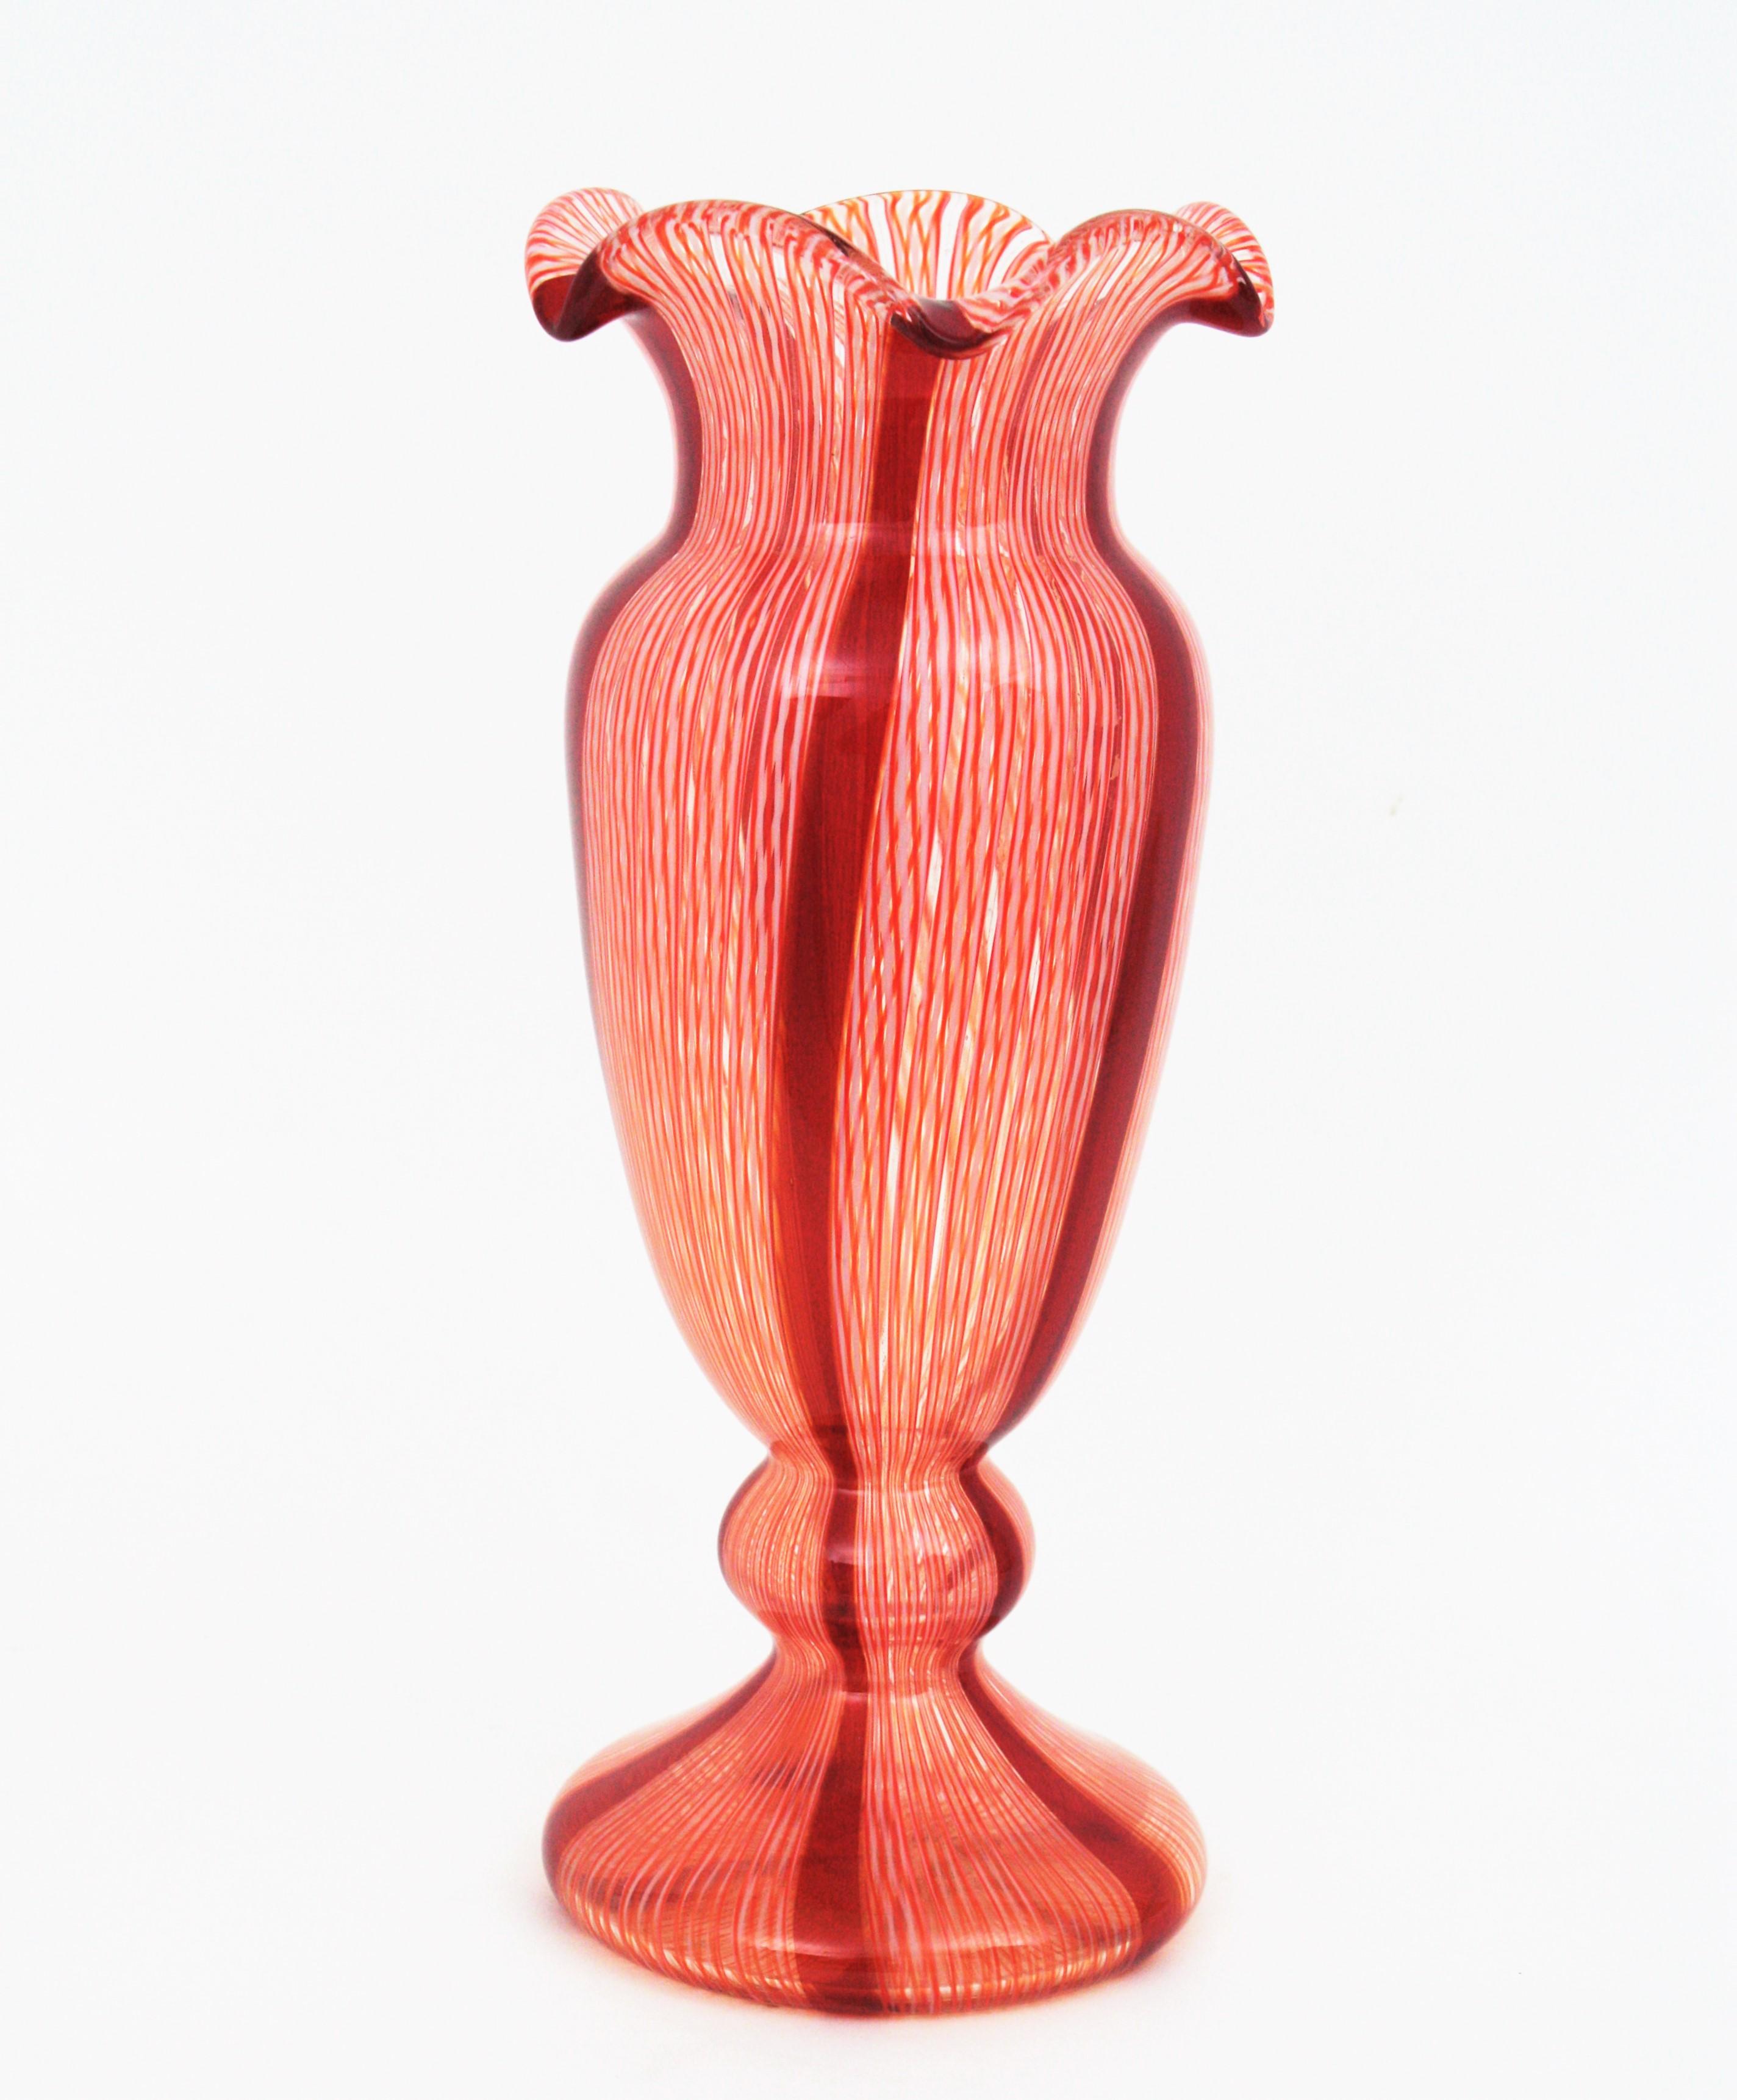 Sculptural Early 20th century Blown Glass Zanfirico Murano Vase with Red and White Ribbons.  Attributed to Fratelli Toso. 
Made with the caneworking glassblowing technique in ruby red and white glass with accents in yellow. This gorgeous vase show a